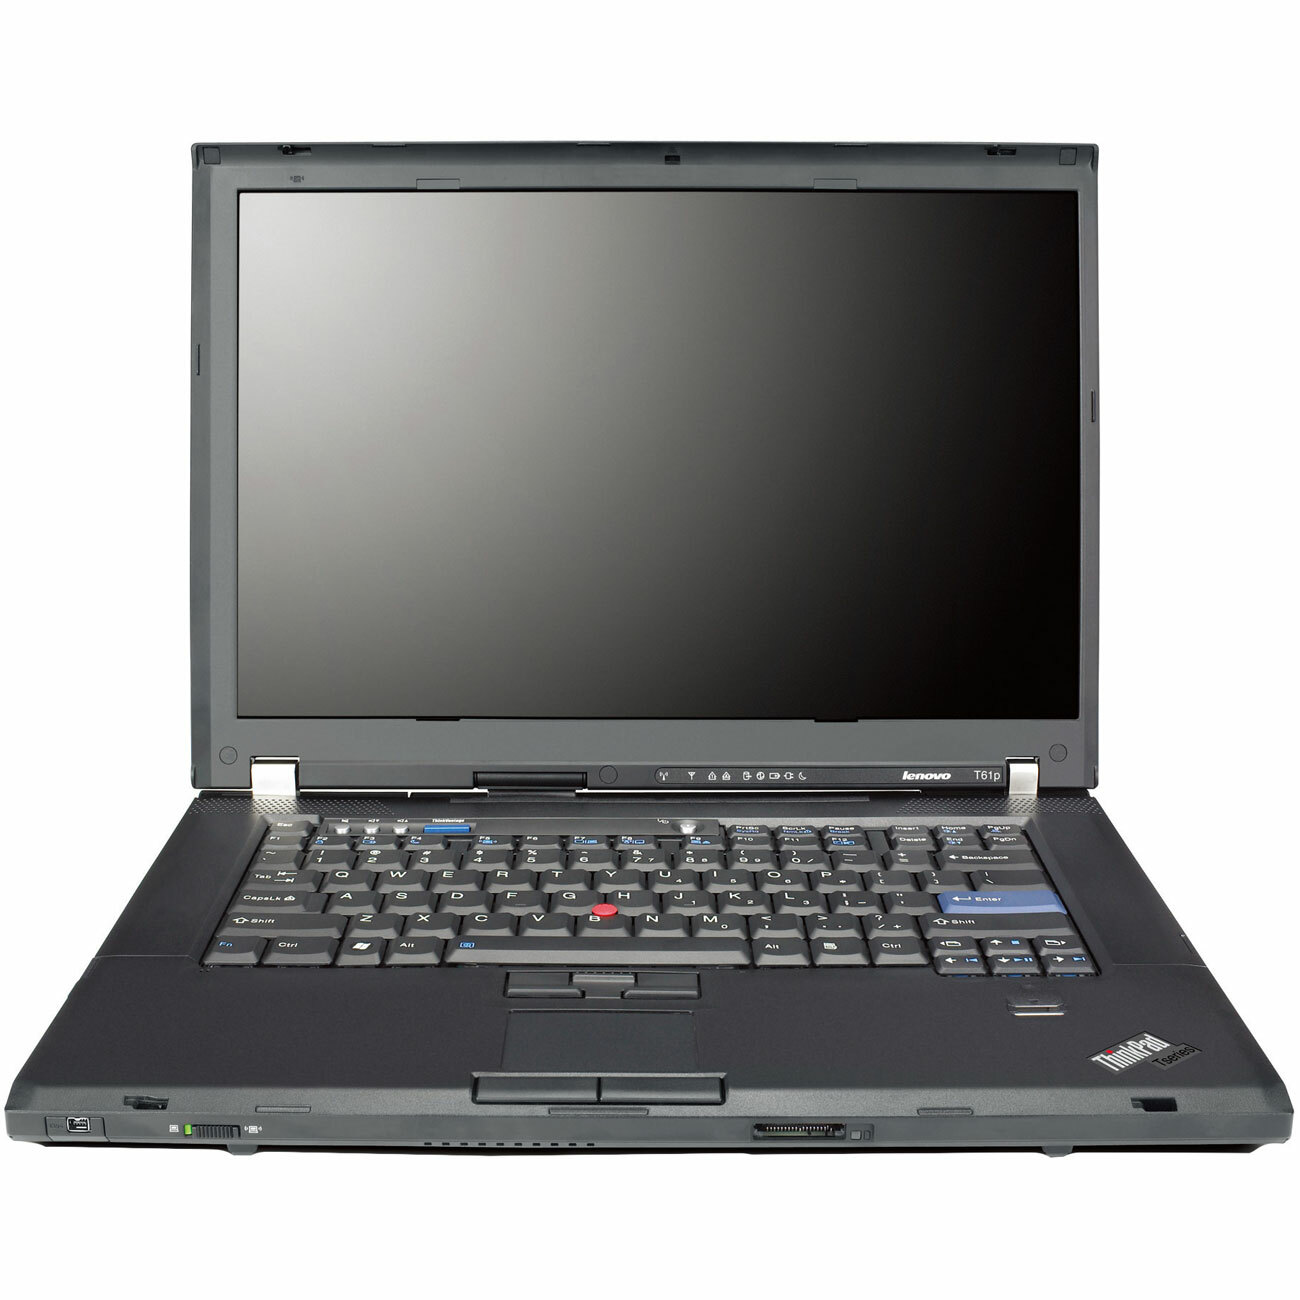 lenovo g575 recovery cd download